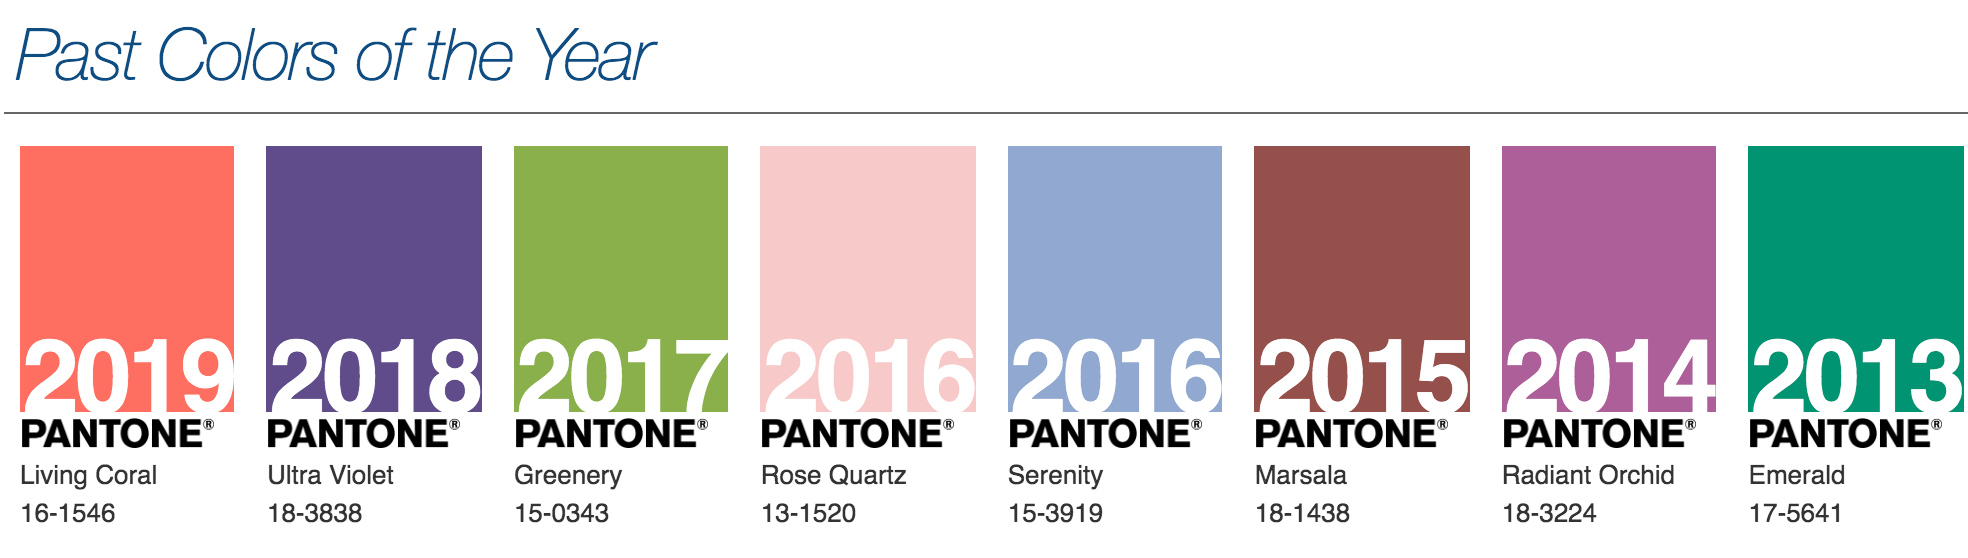 Past Pantone Color of the Year for Weddings